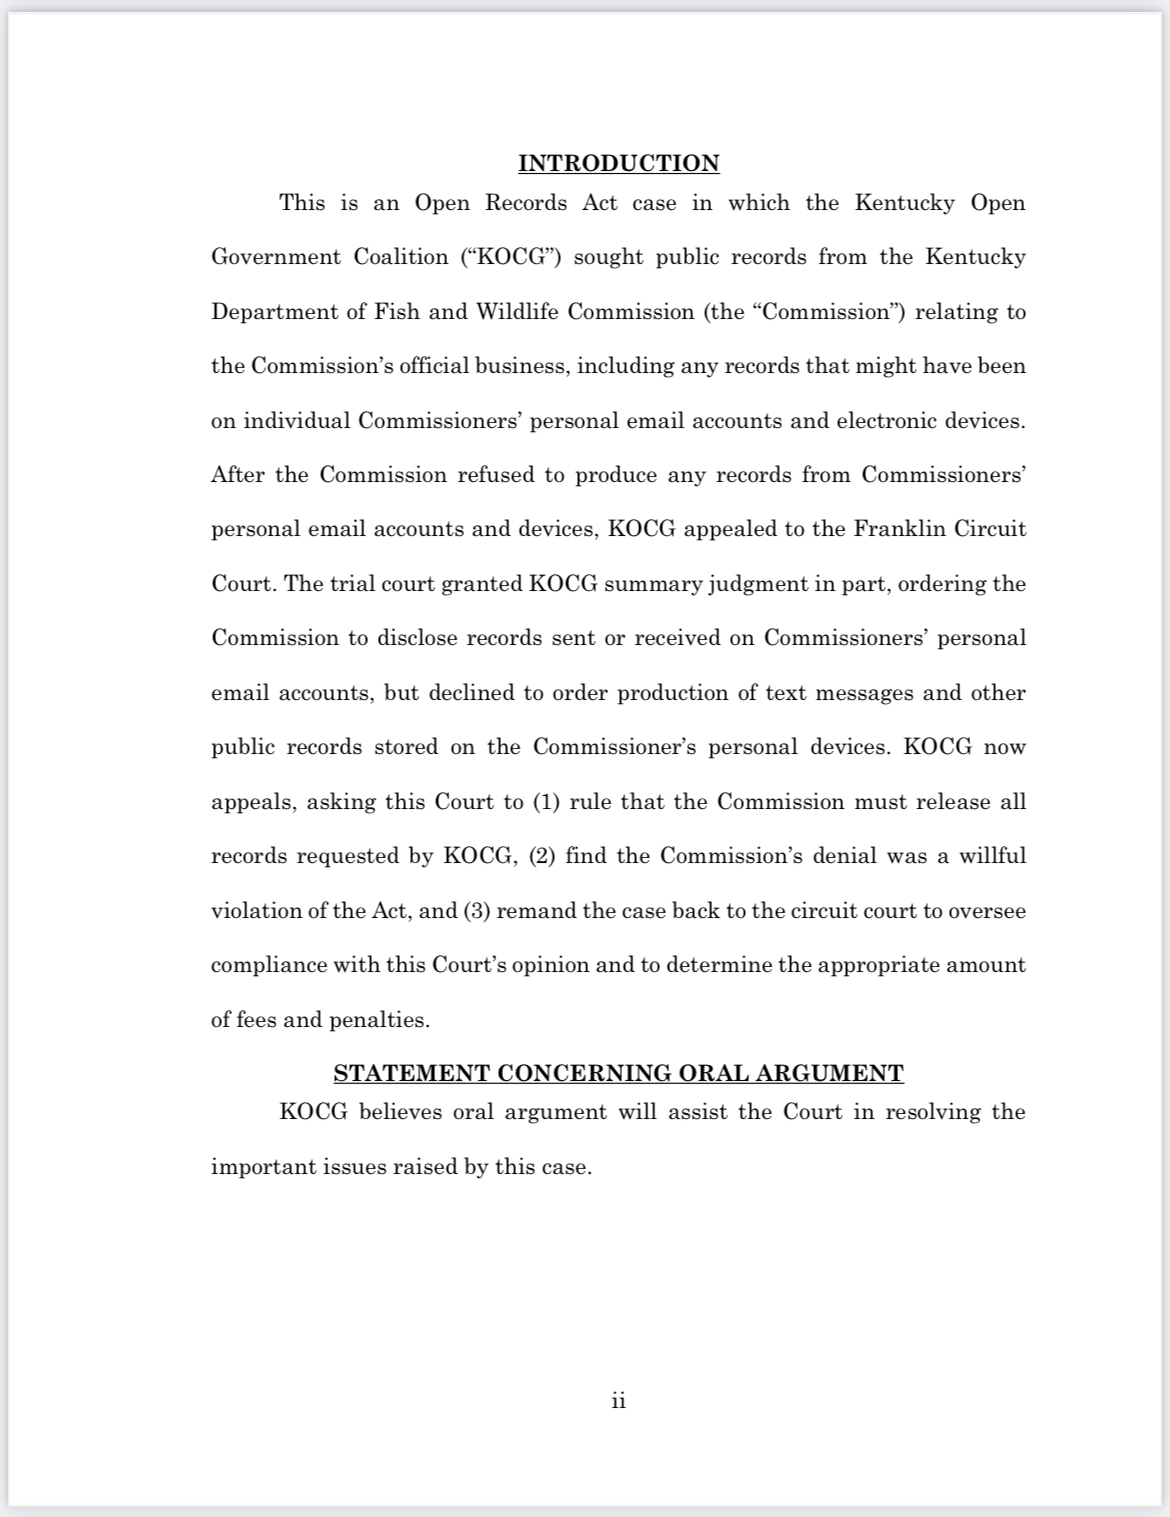 Statement of the case in Kentucky Open Government Coalition v Kentucky Department of Fish and Wildlife Resources Commission 